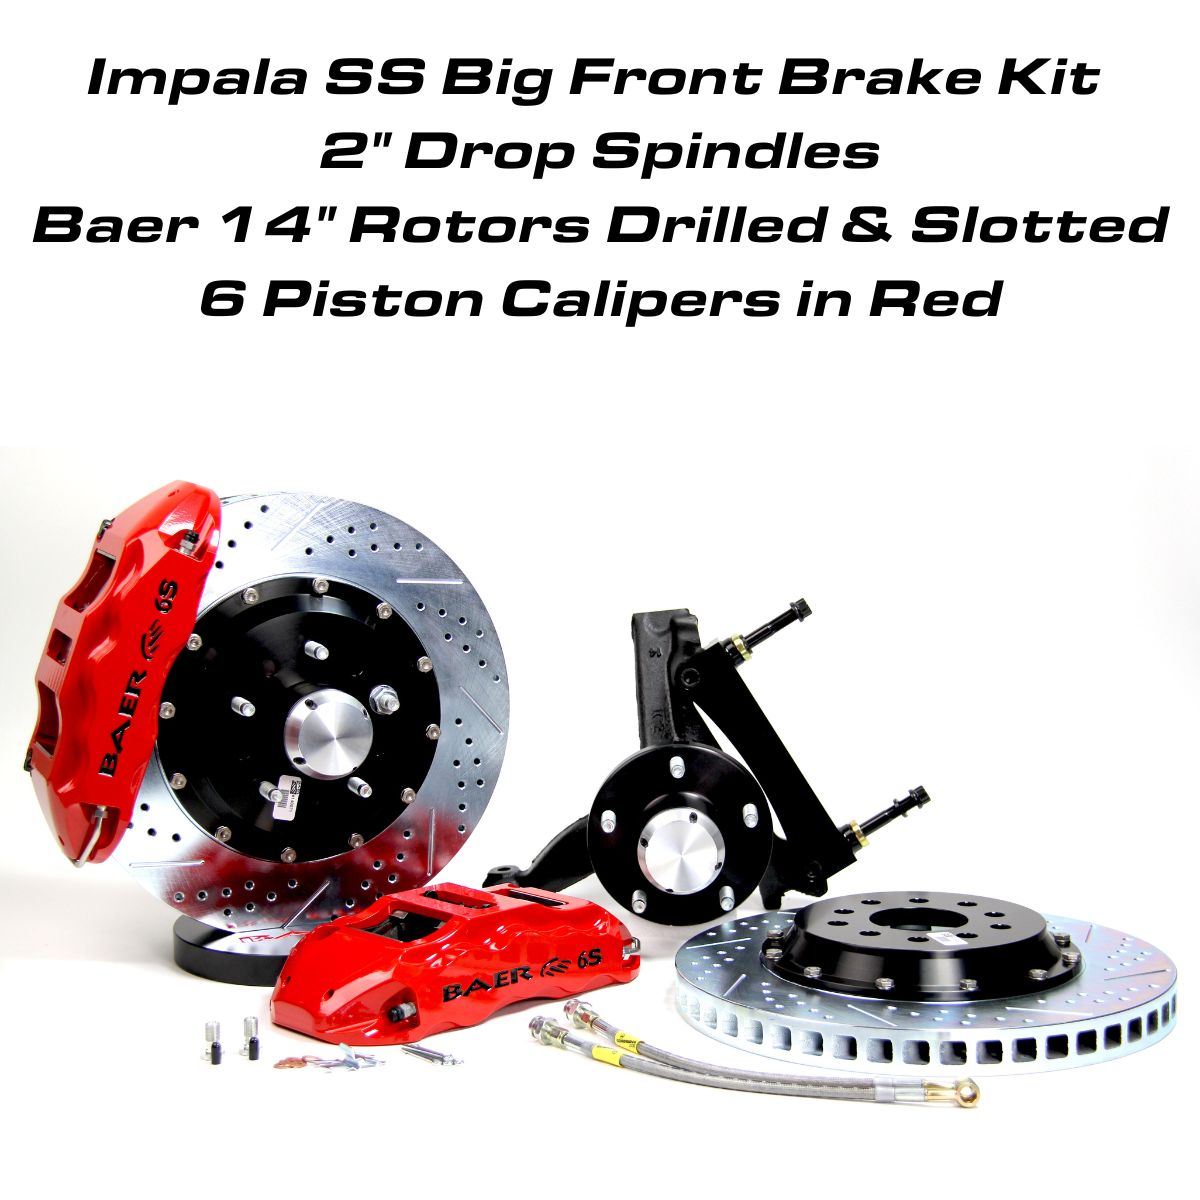 Impala SS Big Front Brake Kit, 14 Inch Baer Rotors, 6 Piston Forged 6S Calipers, 2 Inch Drop - Drilled and Slotted, Red Calipers